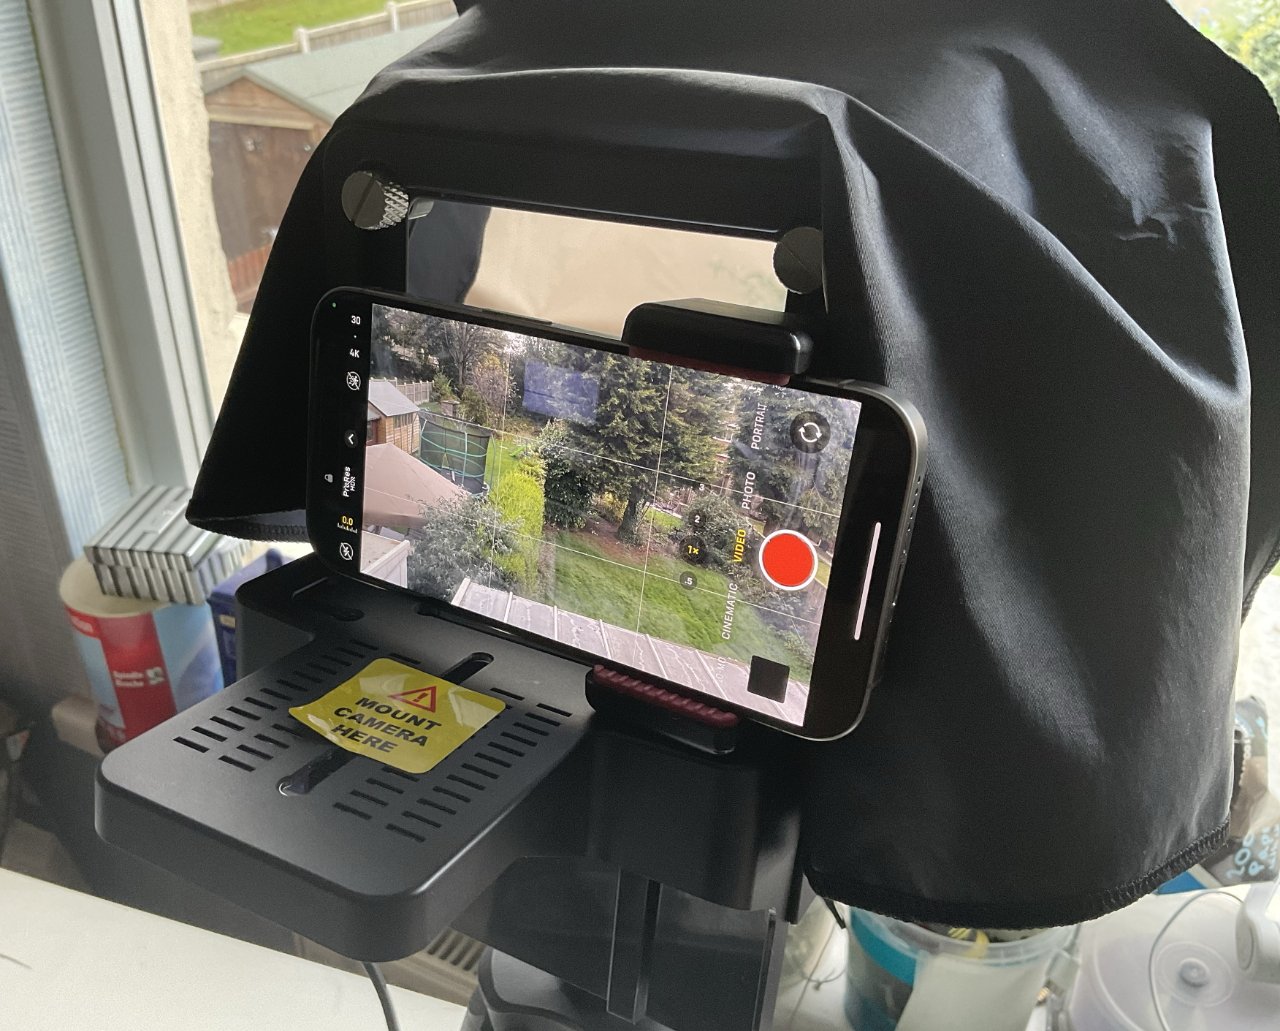 The black cloth at the top is a shroud that normally you pull back down over the camera. It prevents light getting in to the device and reflecting back into the lens.